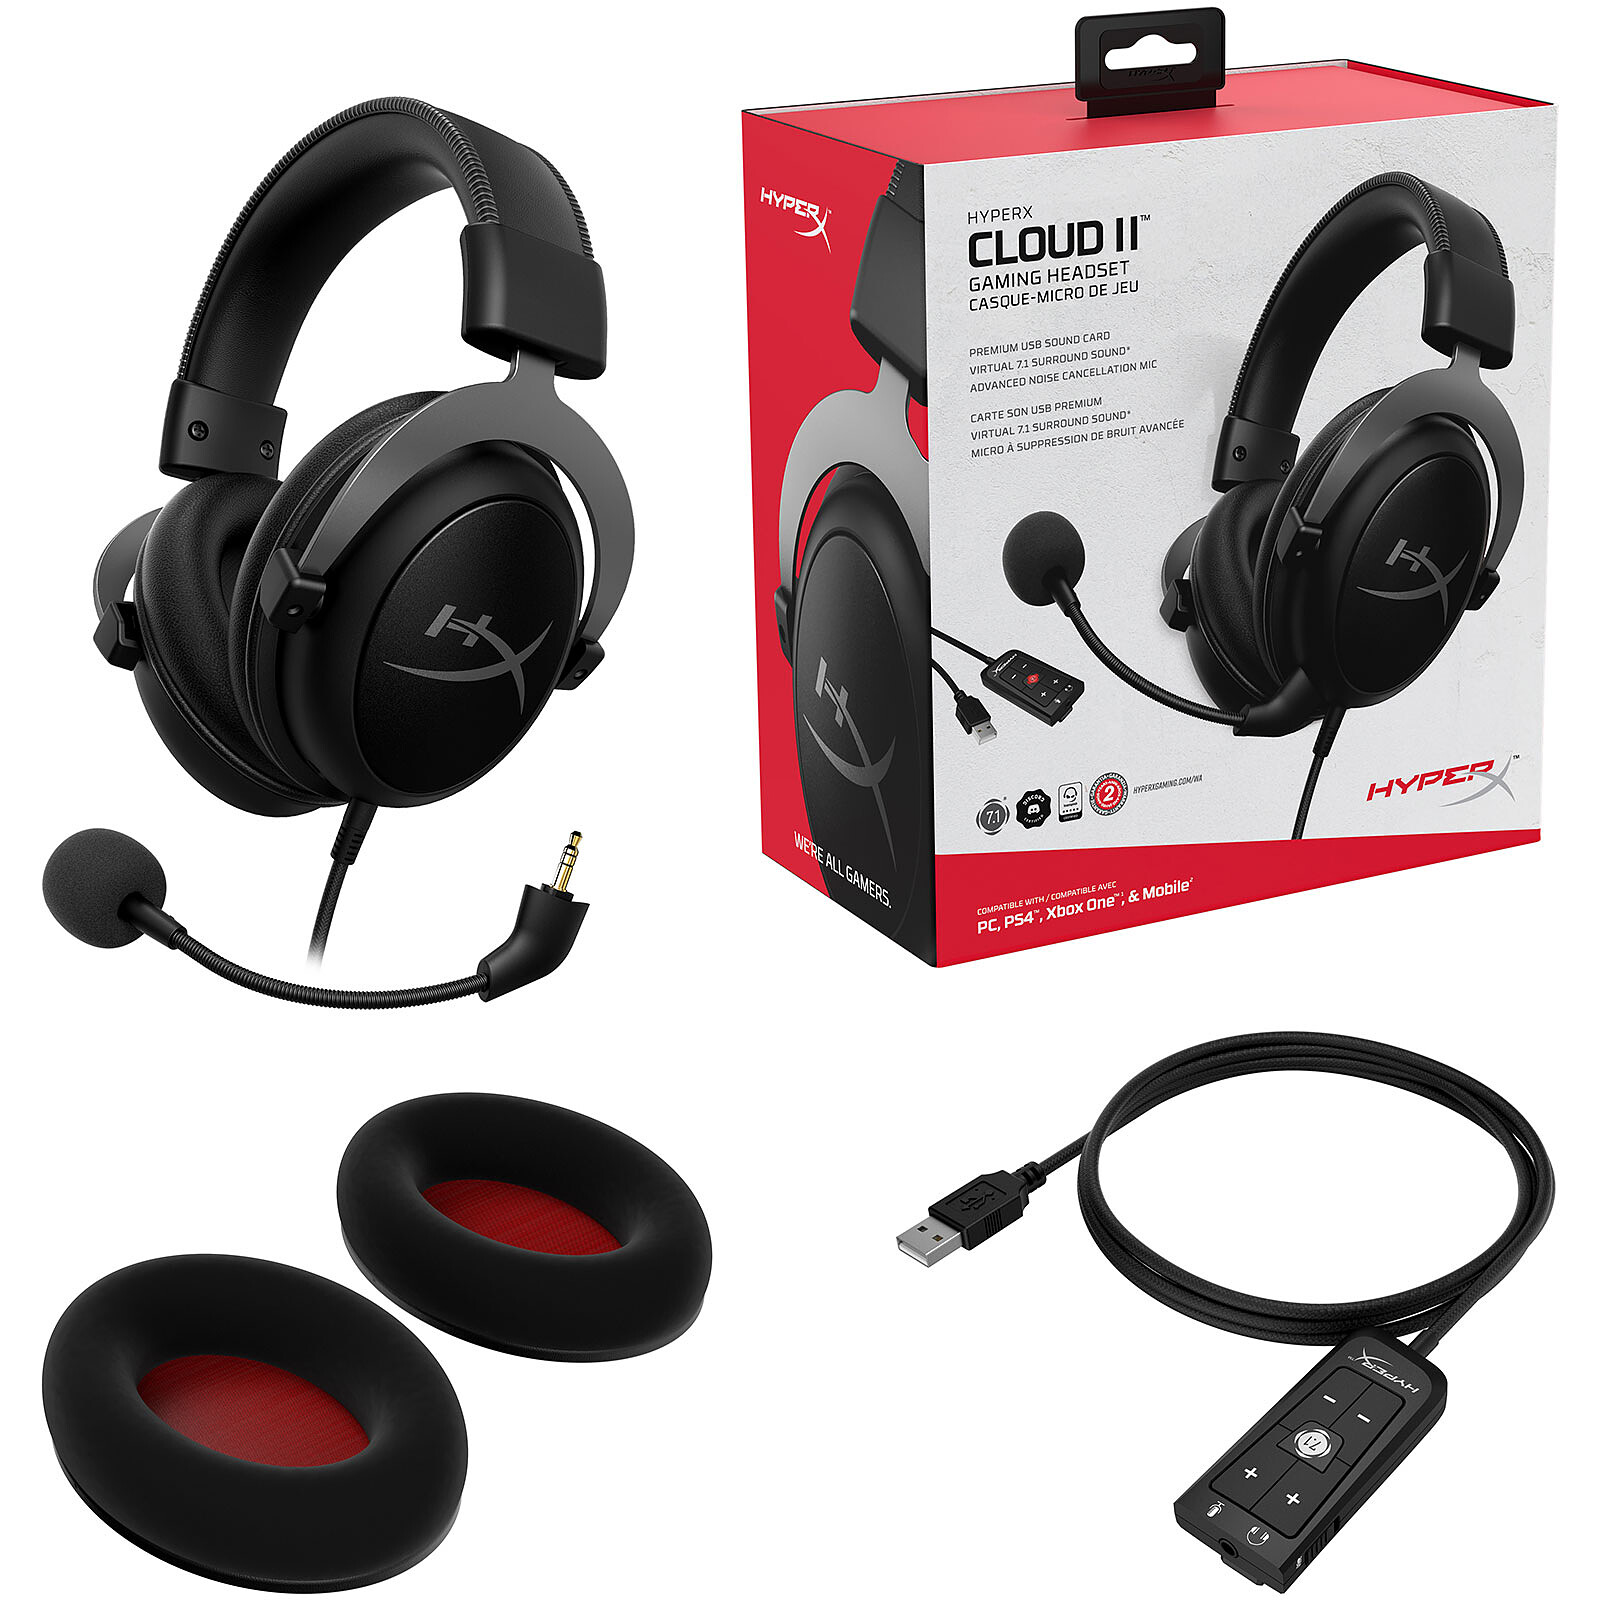 Casque Gamers avec Micro pour Manette Xbox One Smartphone Son